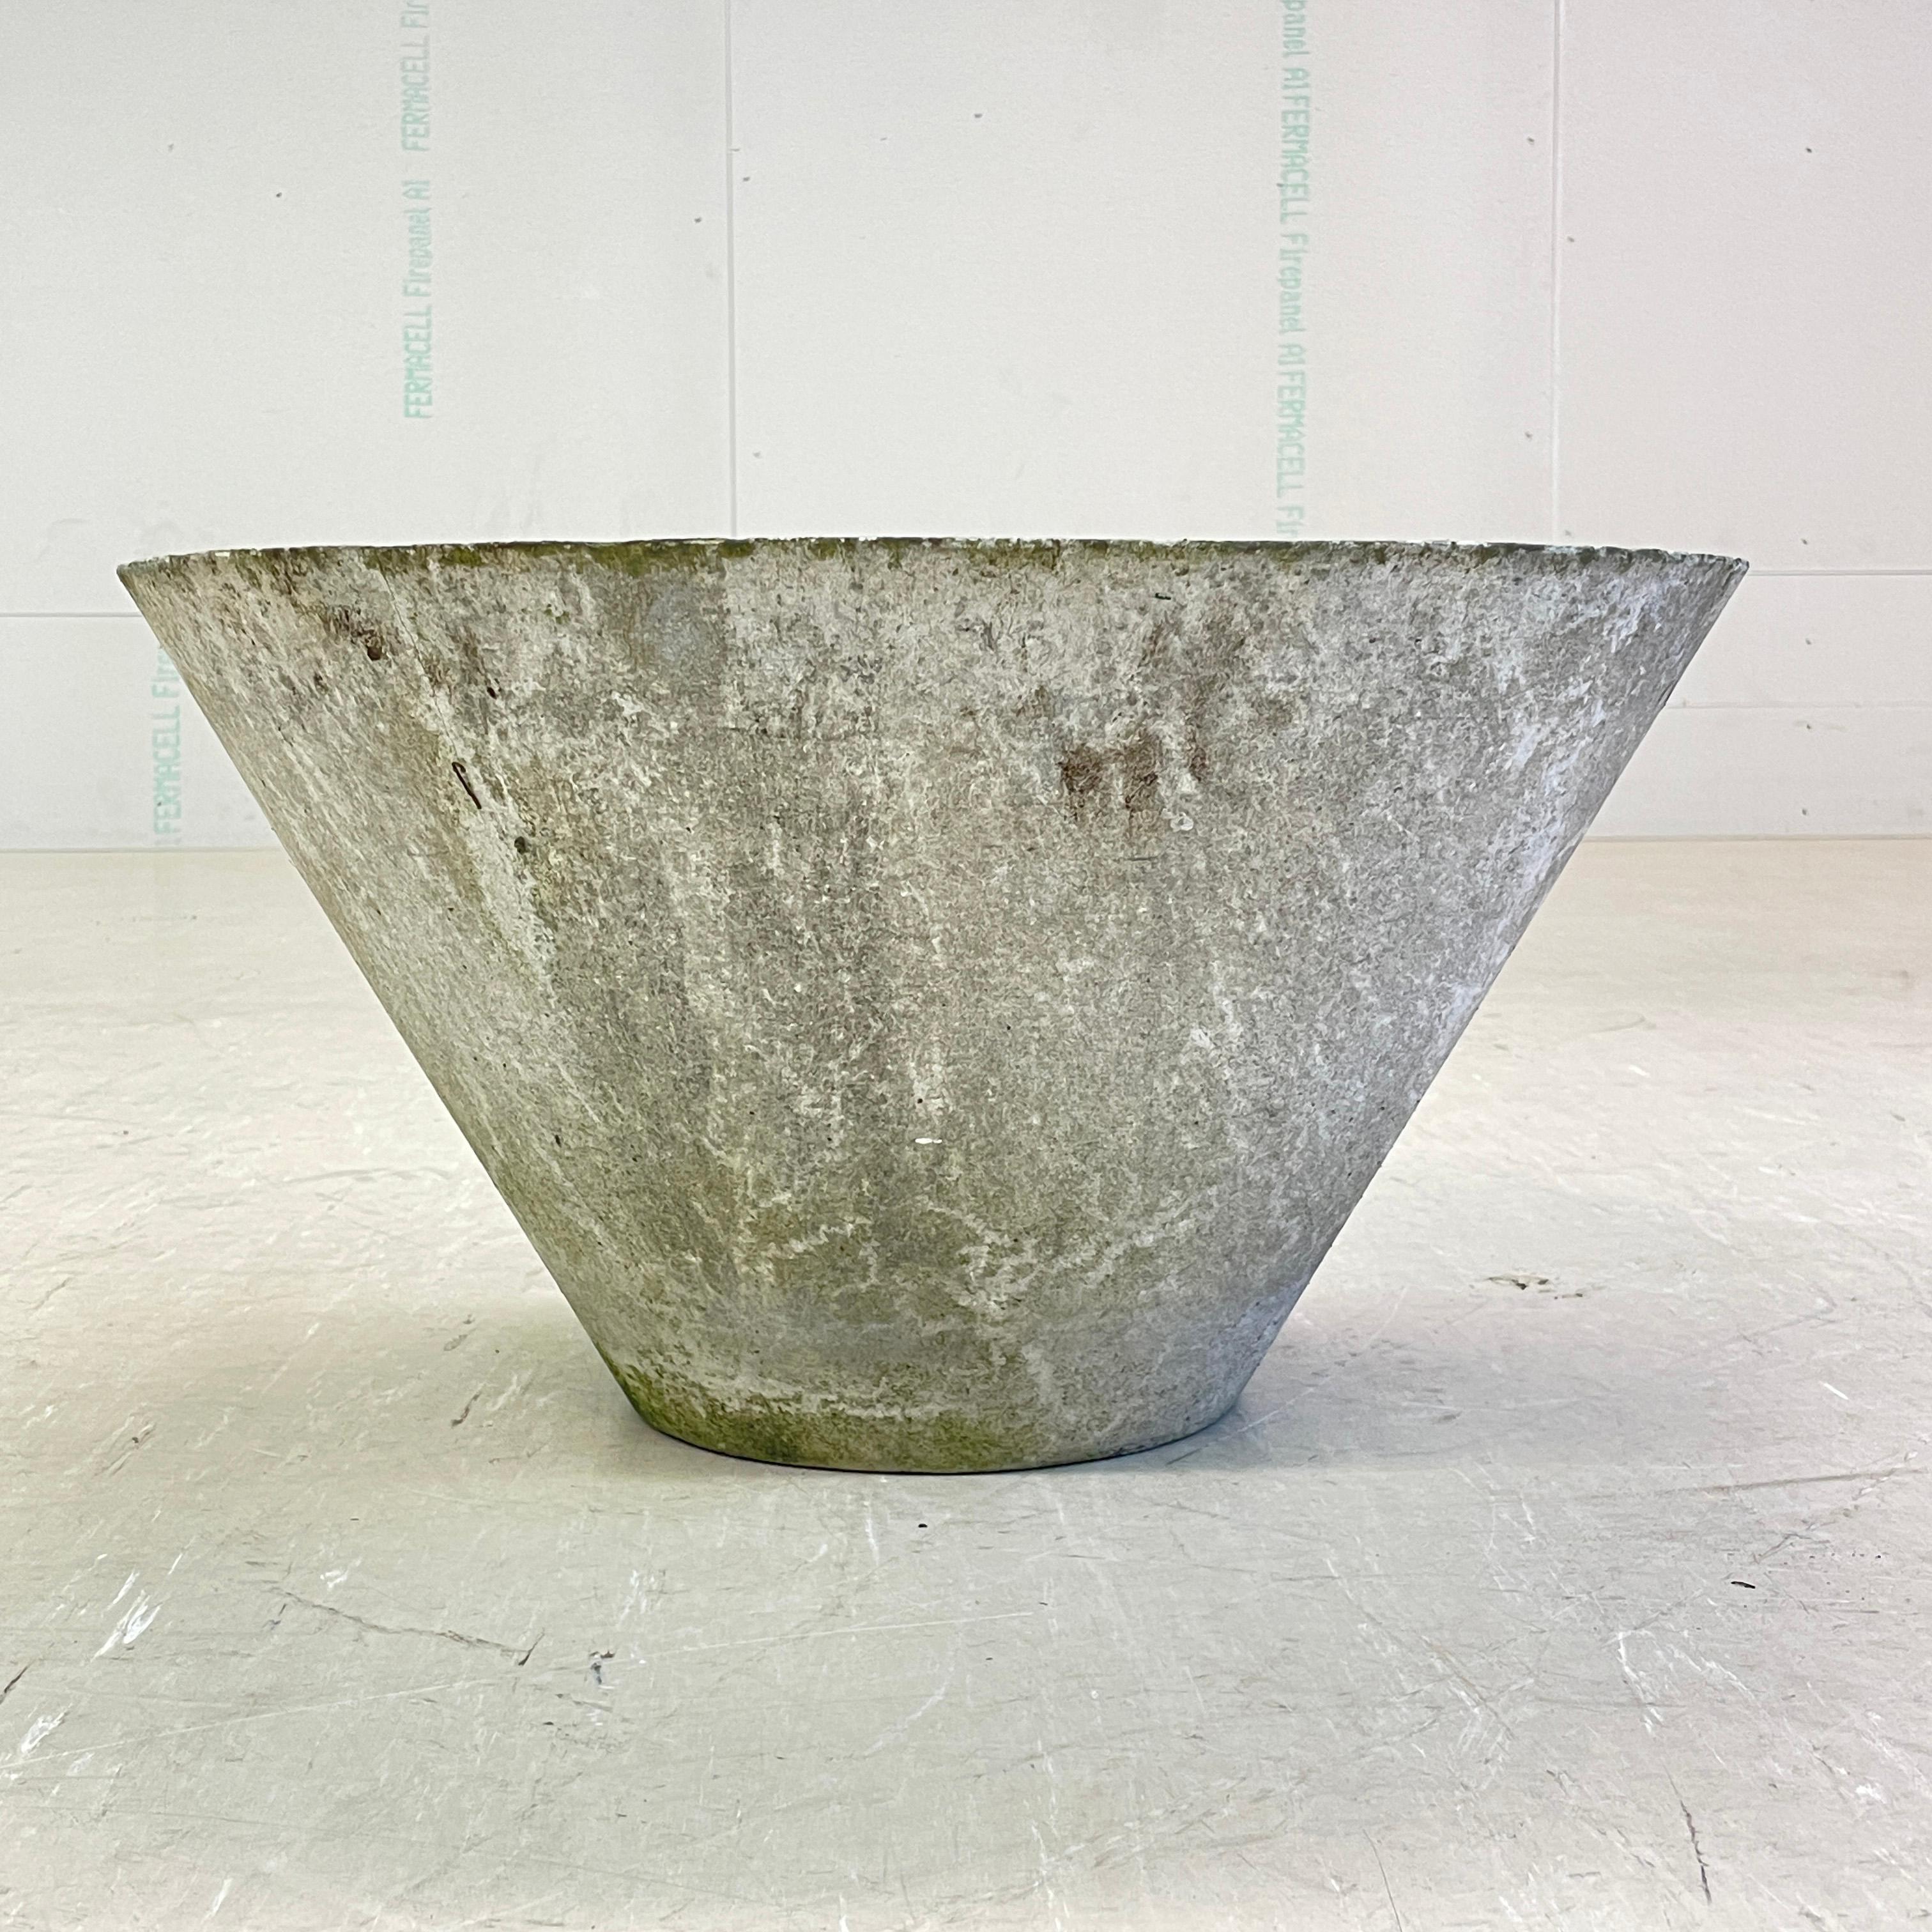 Conical concrete flower pot by Swiss designer, Willy Guhl. Solid concrete made in Switzerland 1960 - 1970. Produced by Eternit AG.  
Tapered structure with drainage holes in base. In original condition with beautiful patination achieved over decades